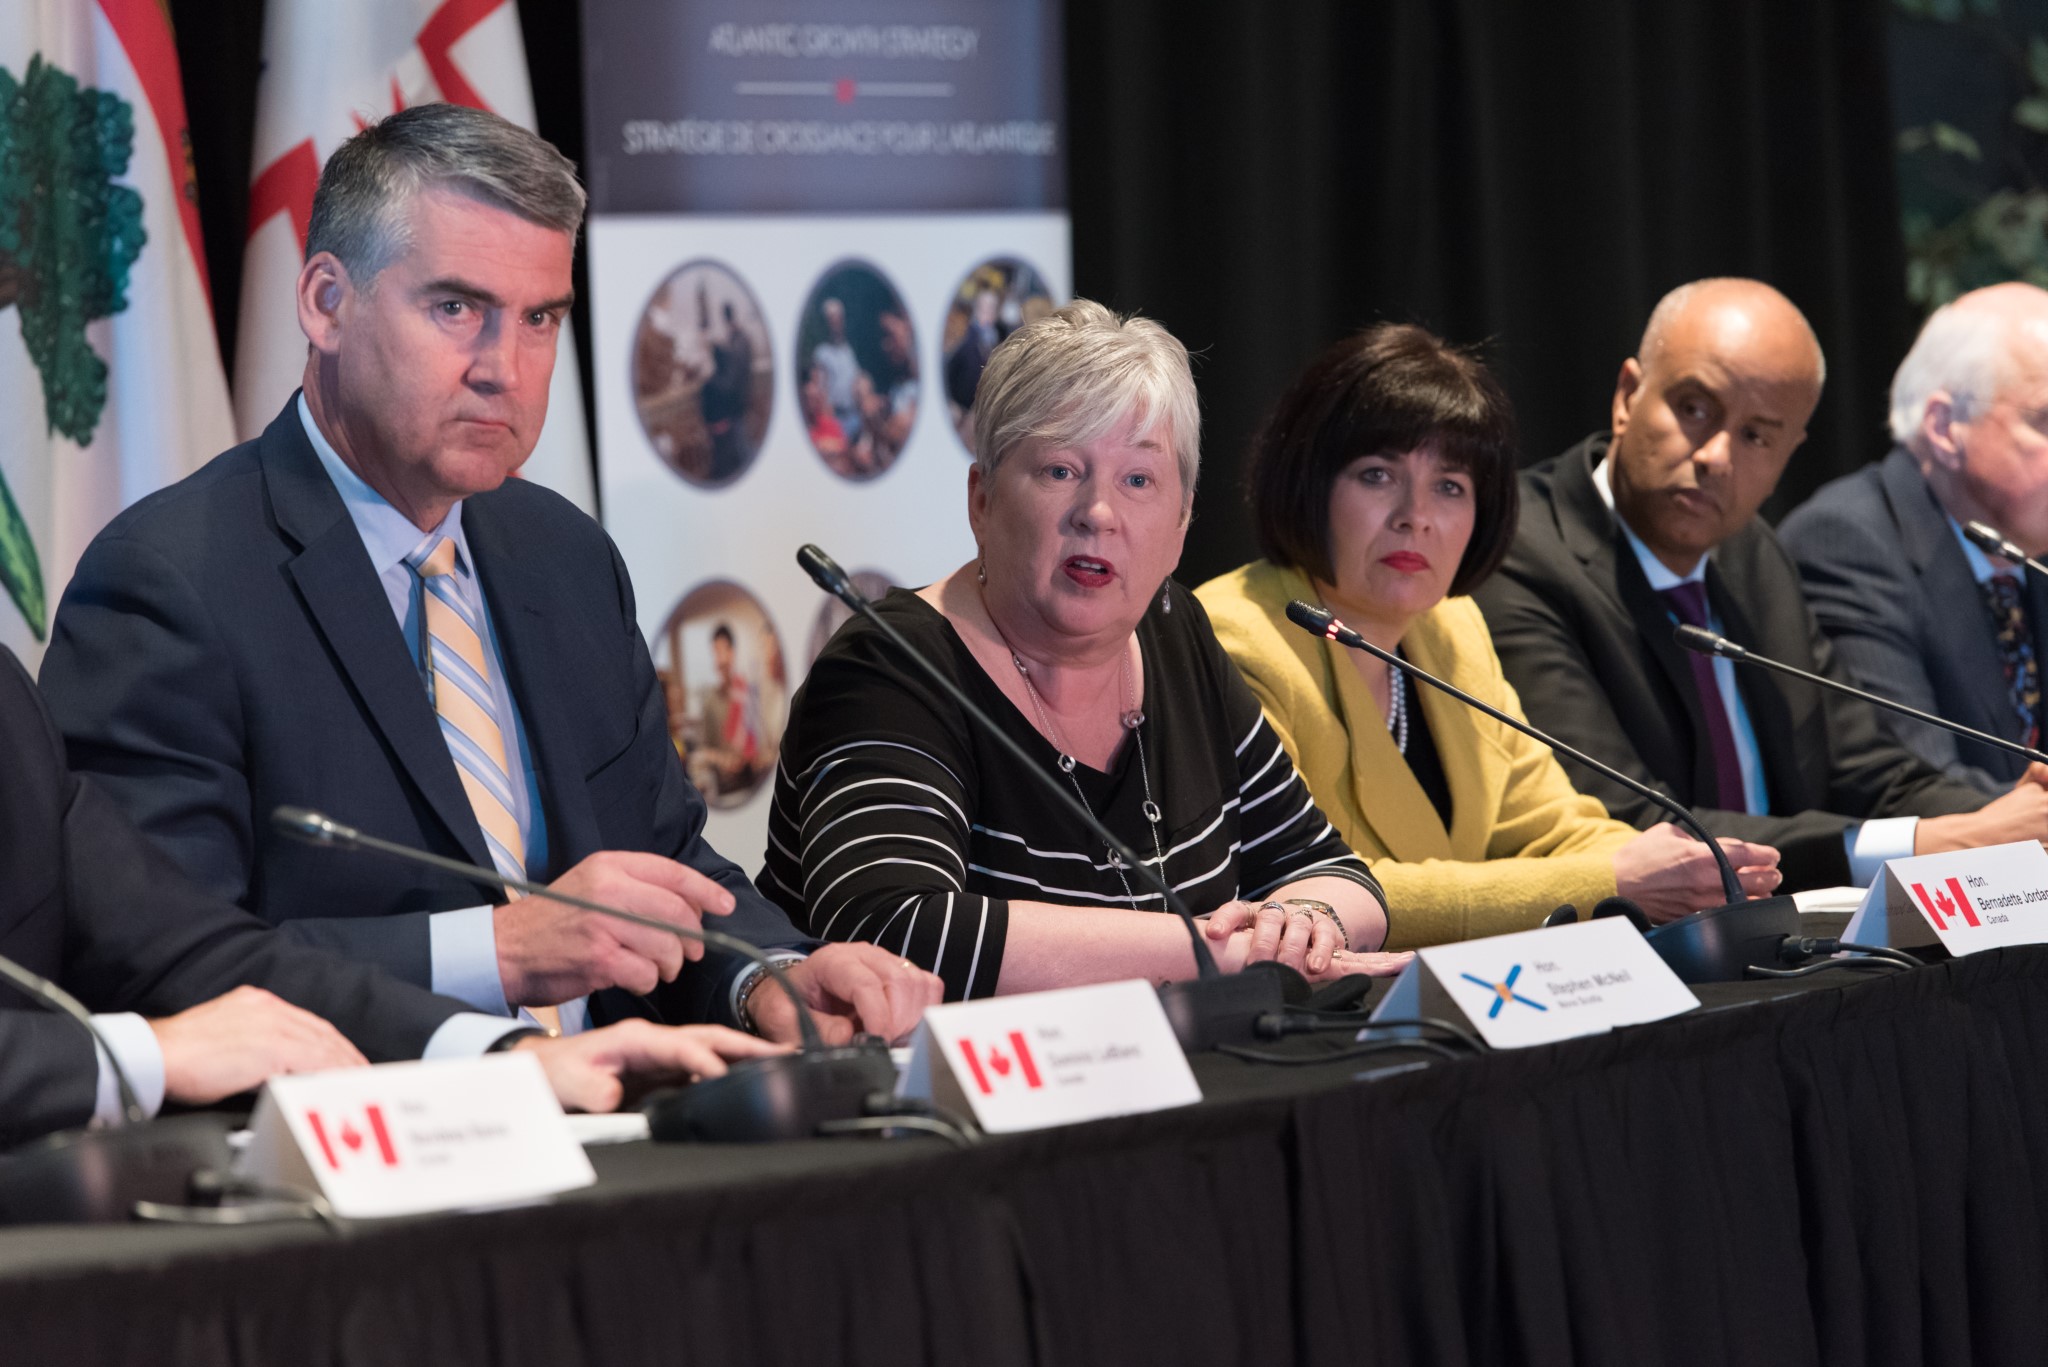 March 1, 2019 – Nova Scotia Premier Stephen McNeil, left, hosts the news conference of the Atlantic Growth Strategy Leadership Committee in Halifax, Nova Scotia. To his right is Bernadette Jordan, Minister of Rural Economic Development.